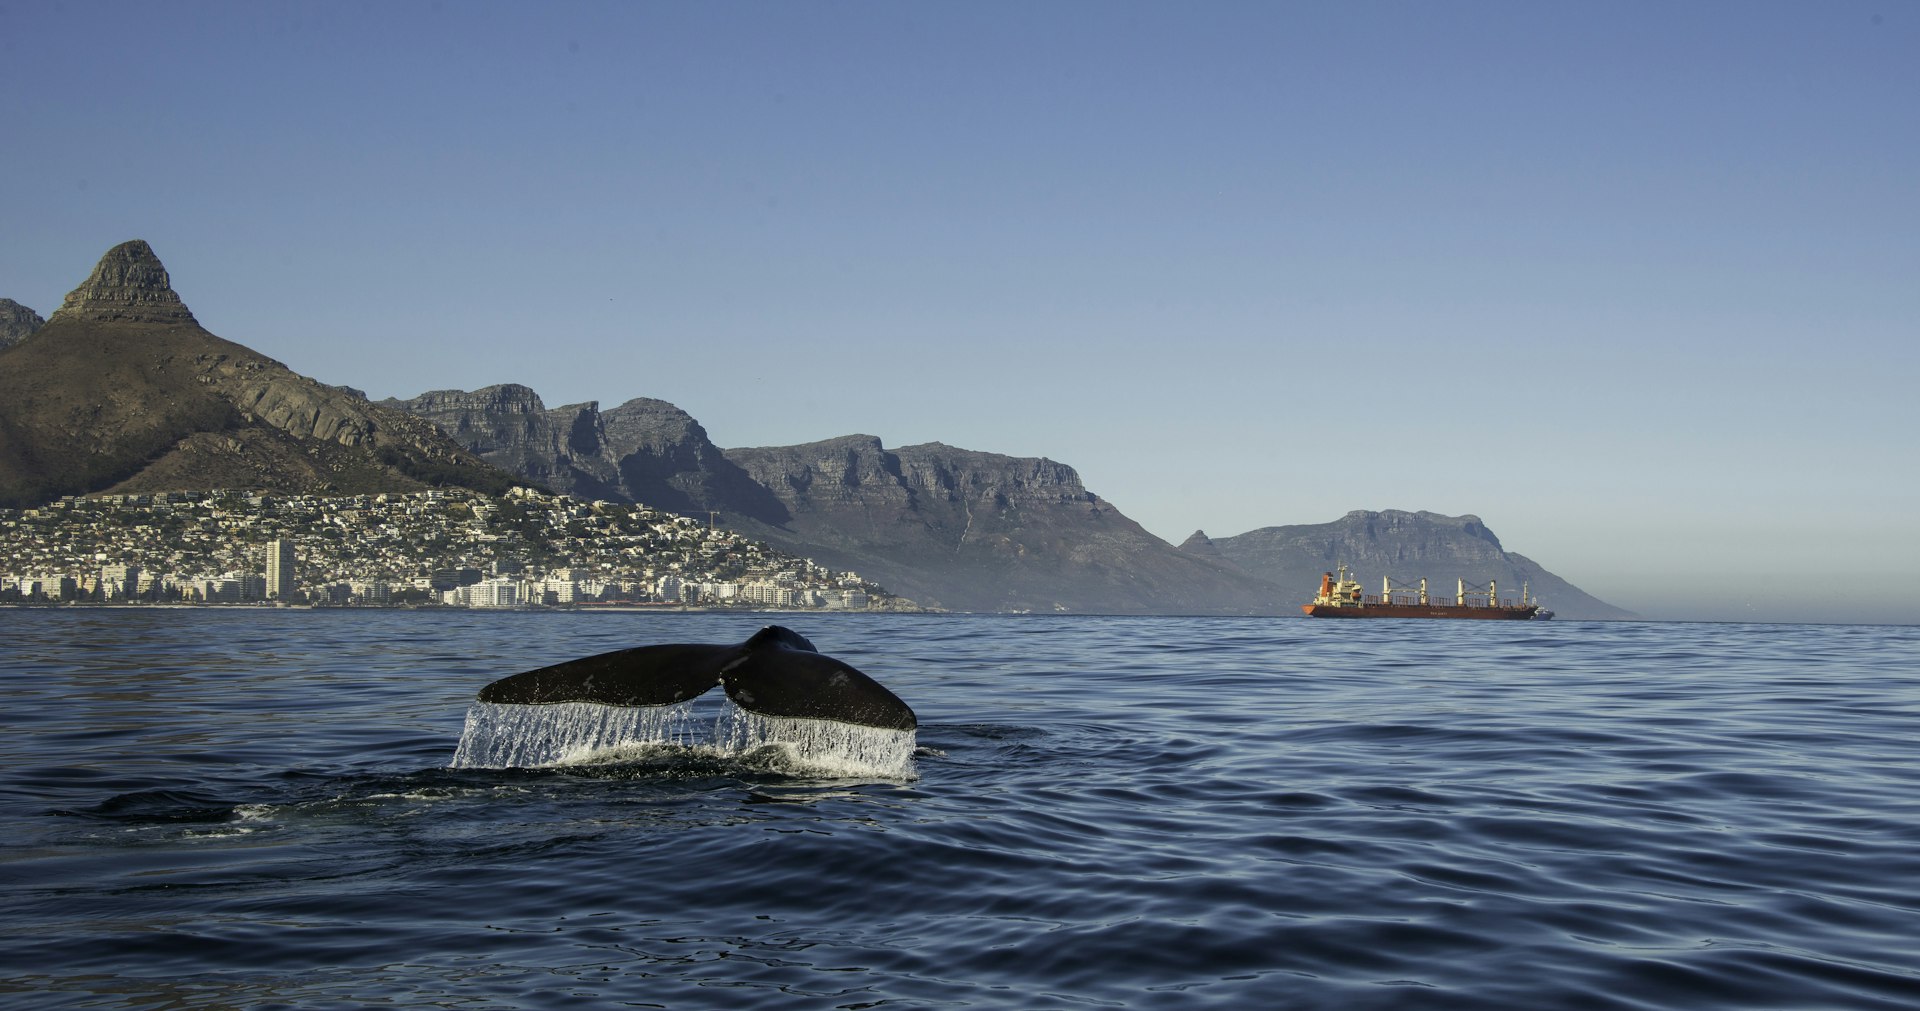 Southern right whale diving in front of the Cape Town waterfront.